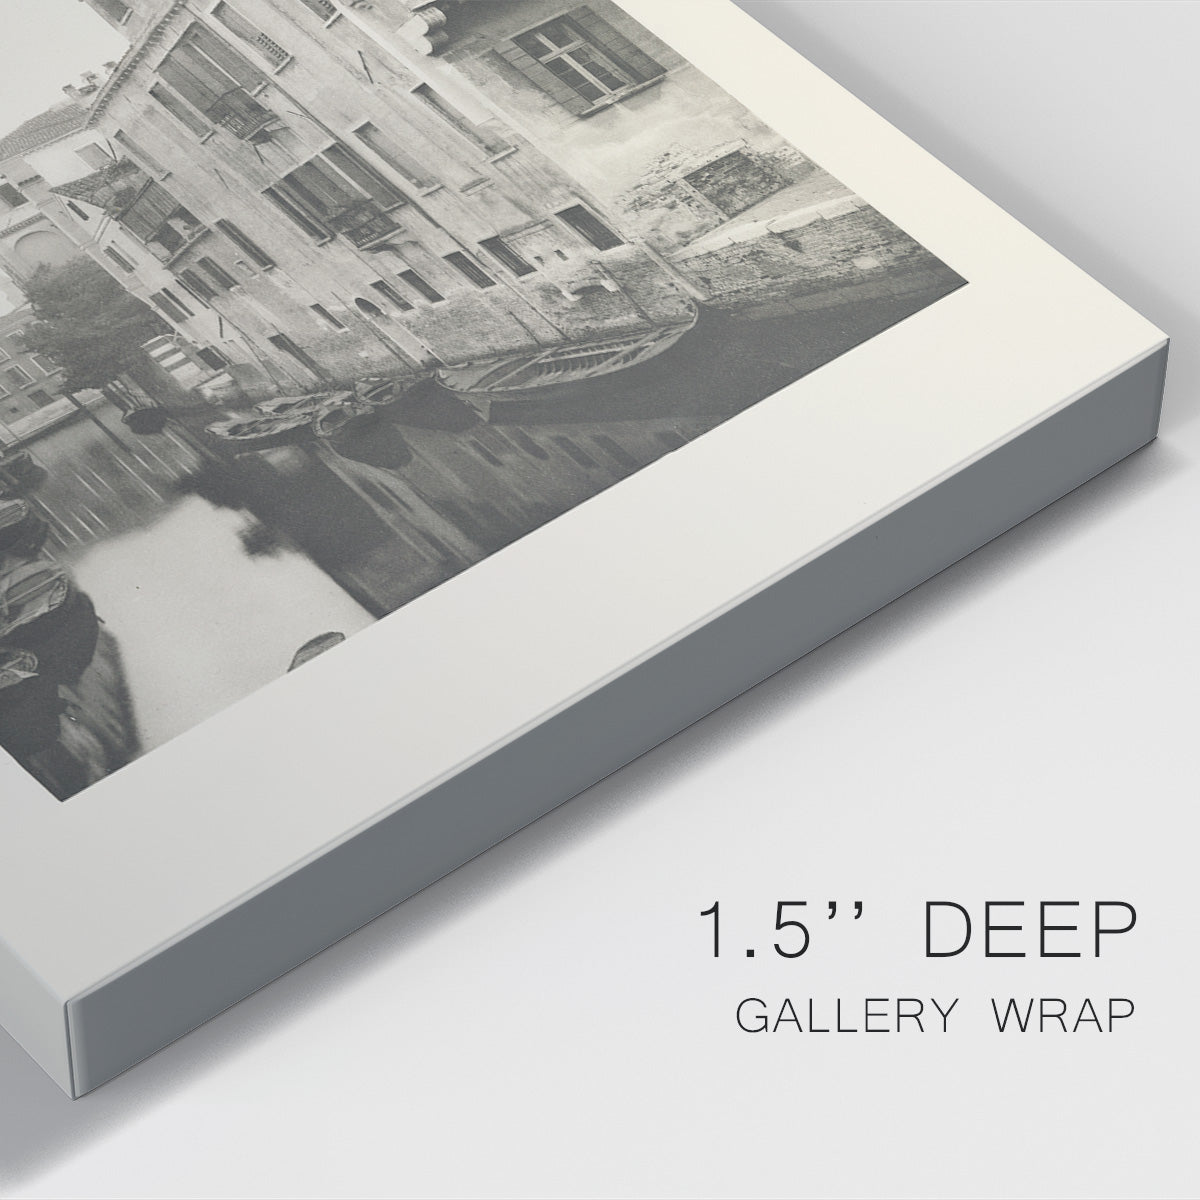 Vintage Views of Venice VII Premium Gallery Wrapped Canvas - Ready to Hang